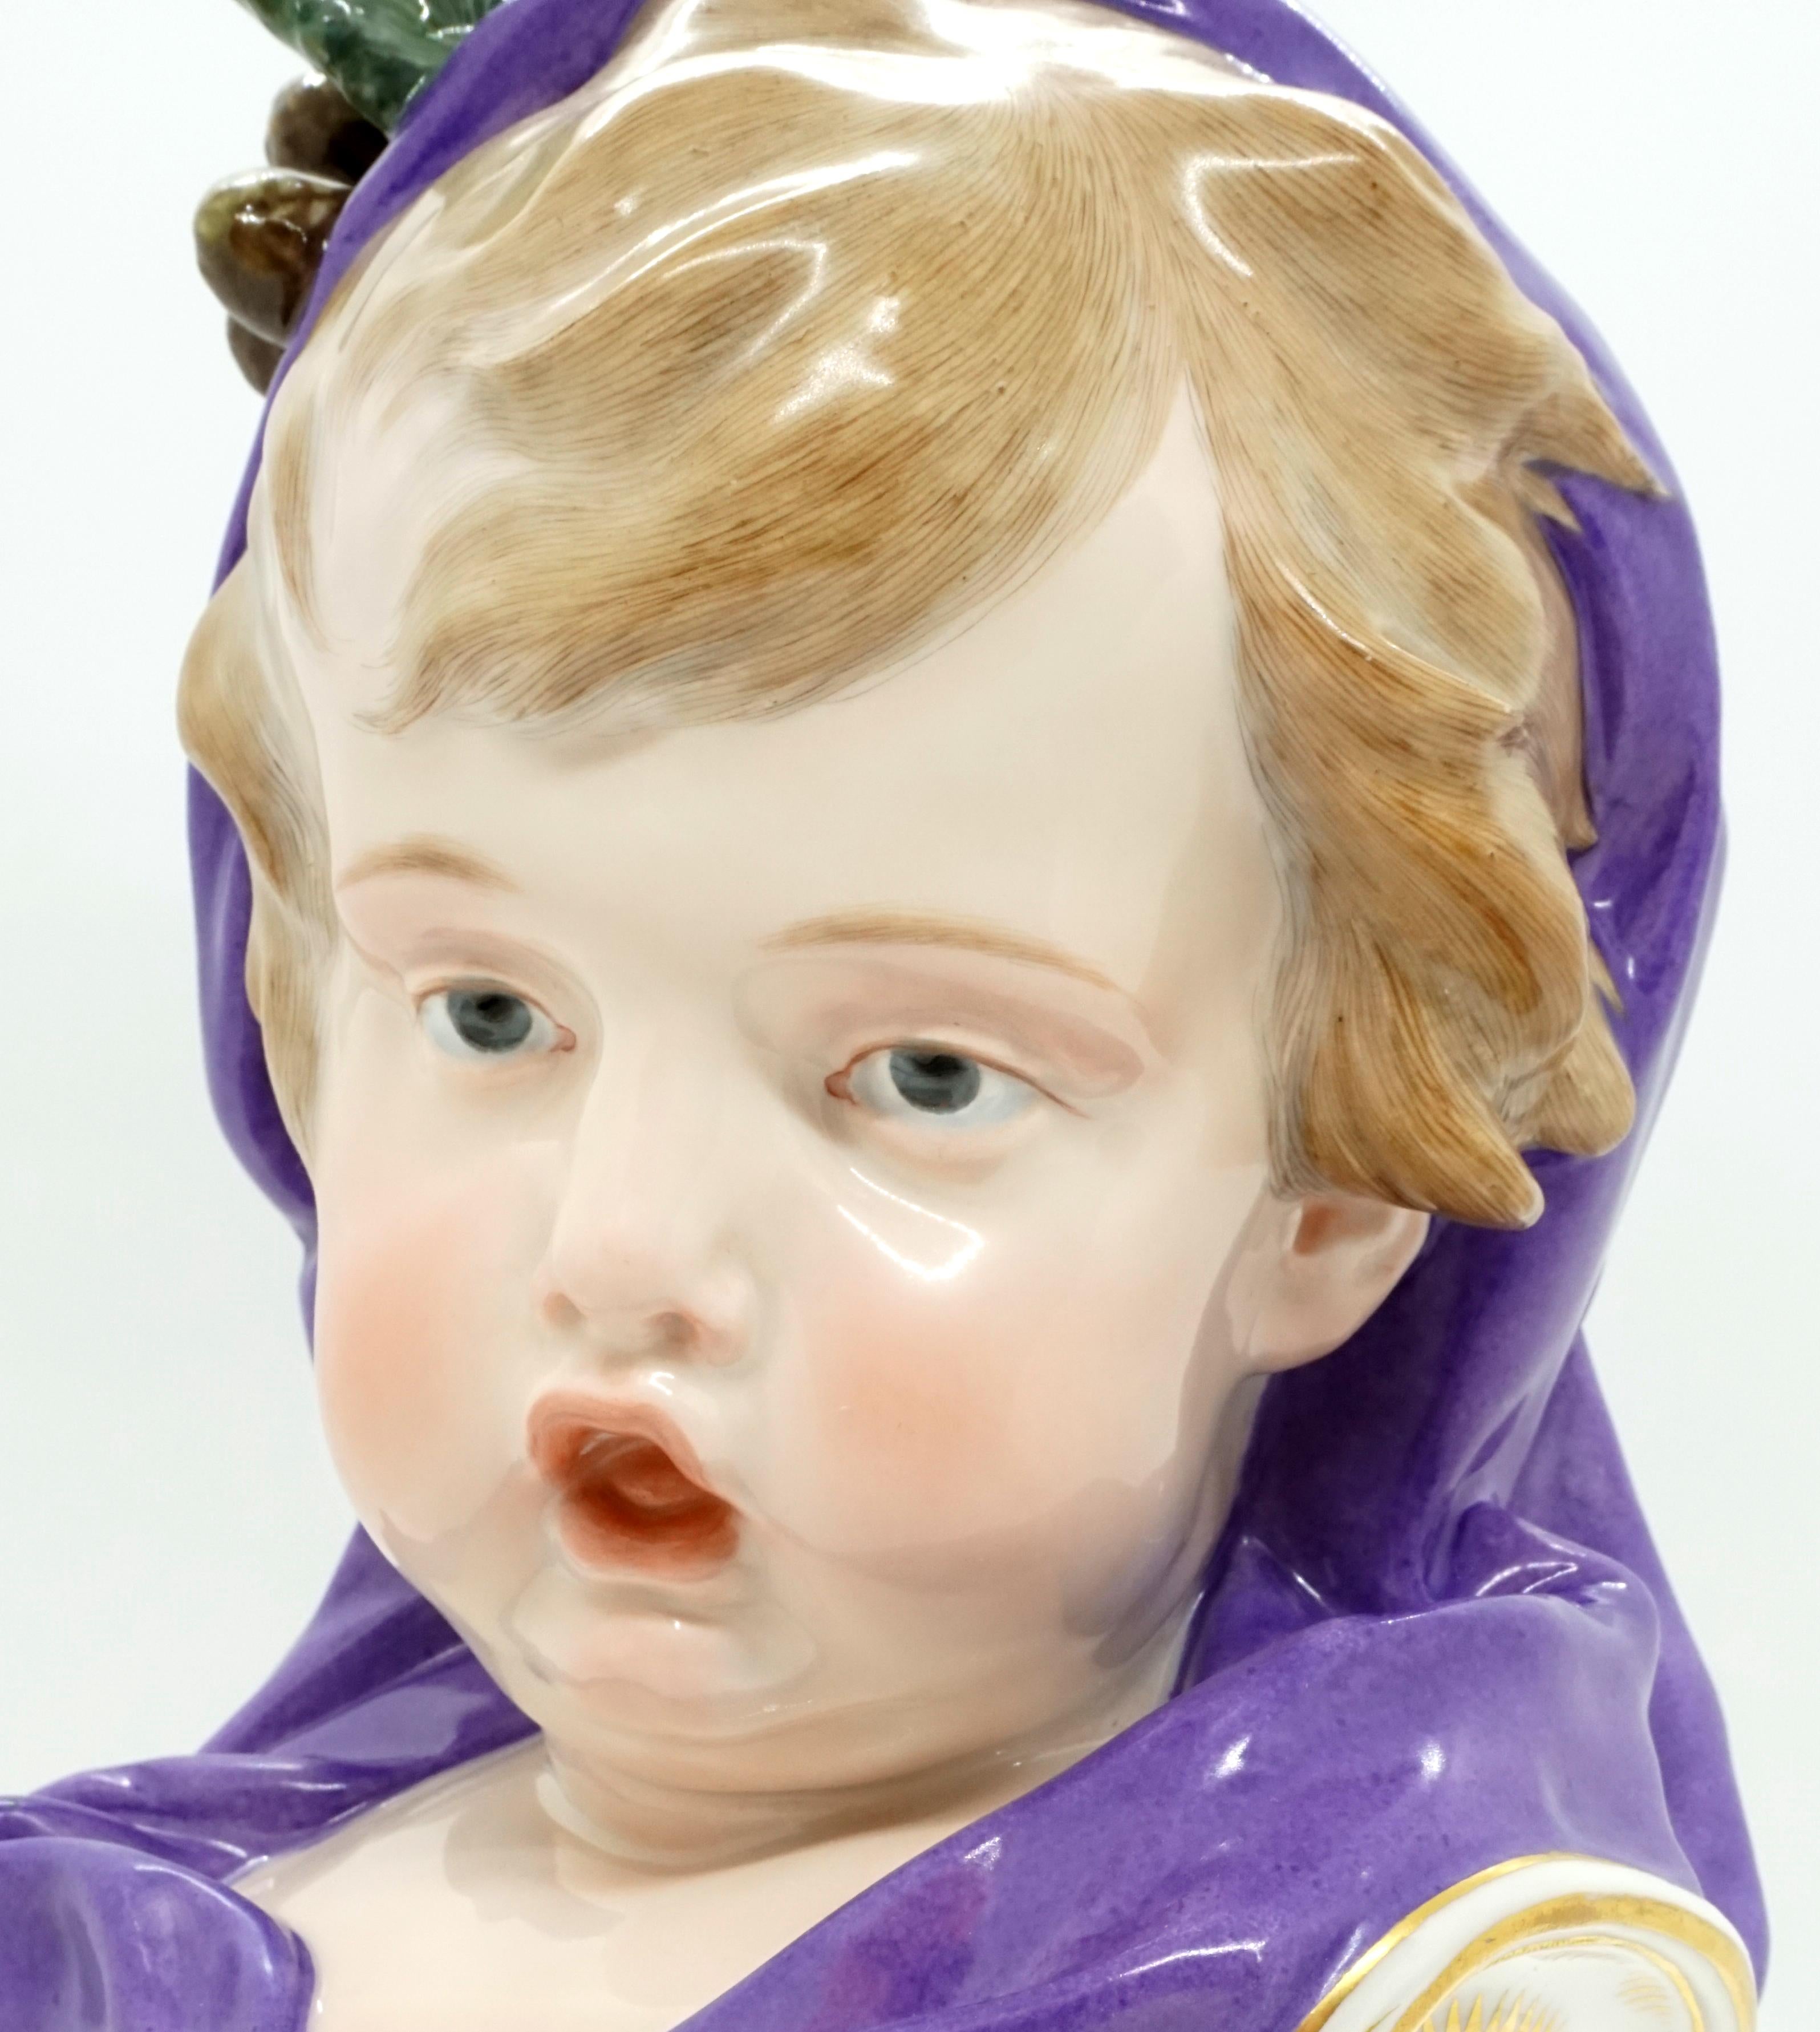 Hand-Crafted Meissen Child Bust 'Winter' from Series of The 4 Seasons, H. Schwabe, circa 1880